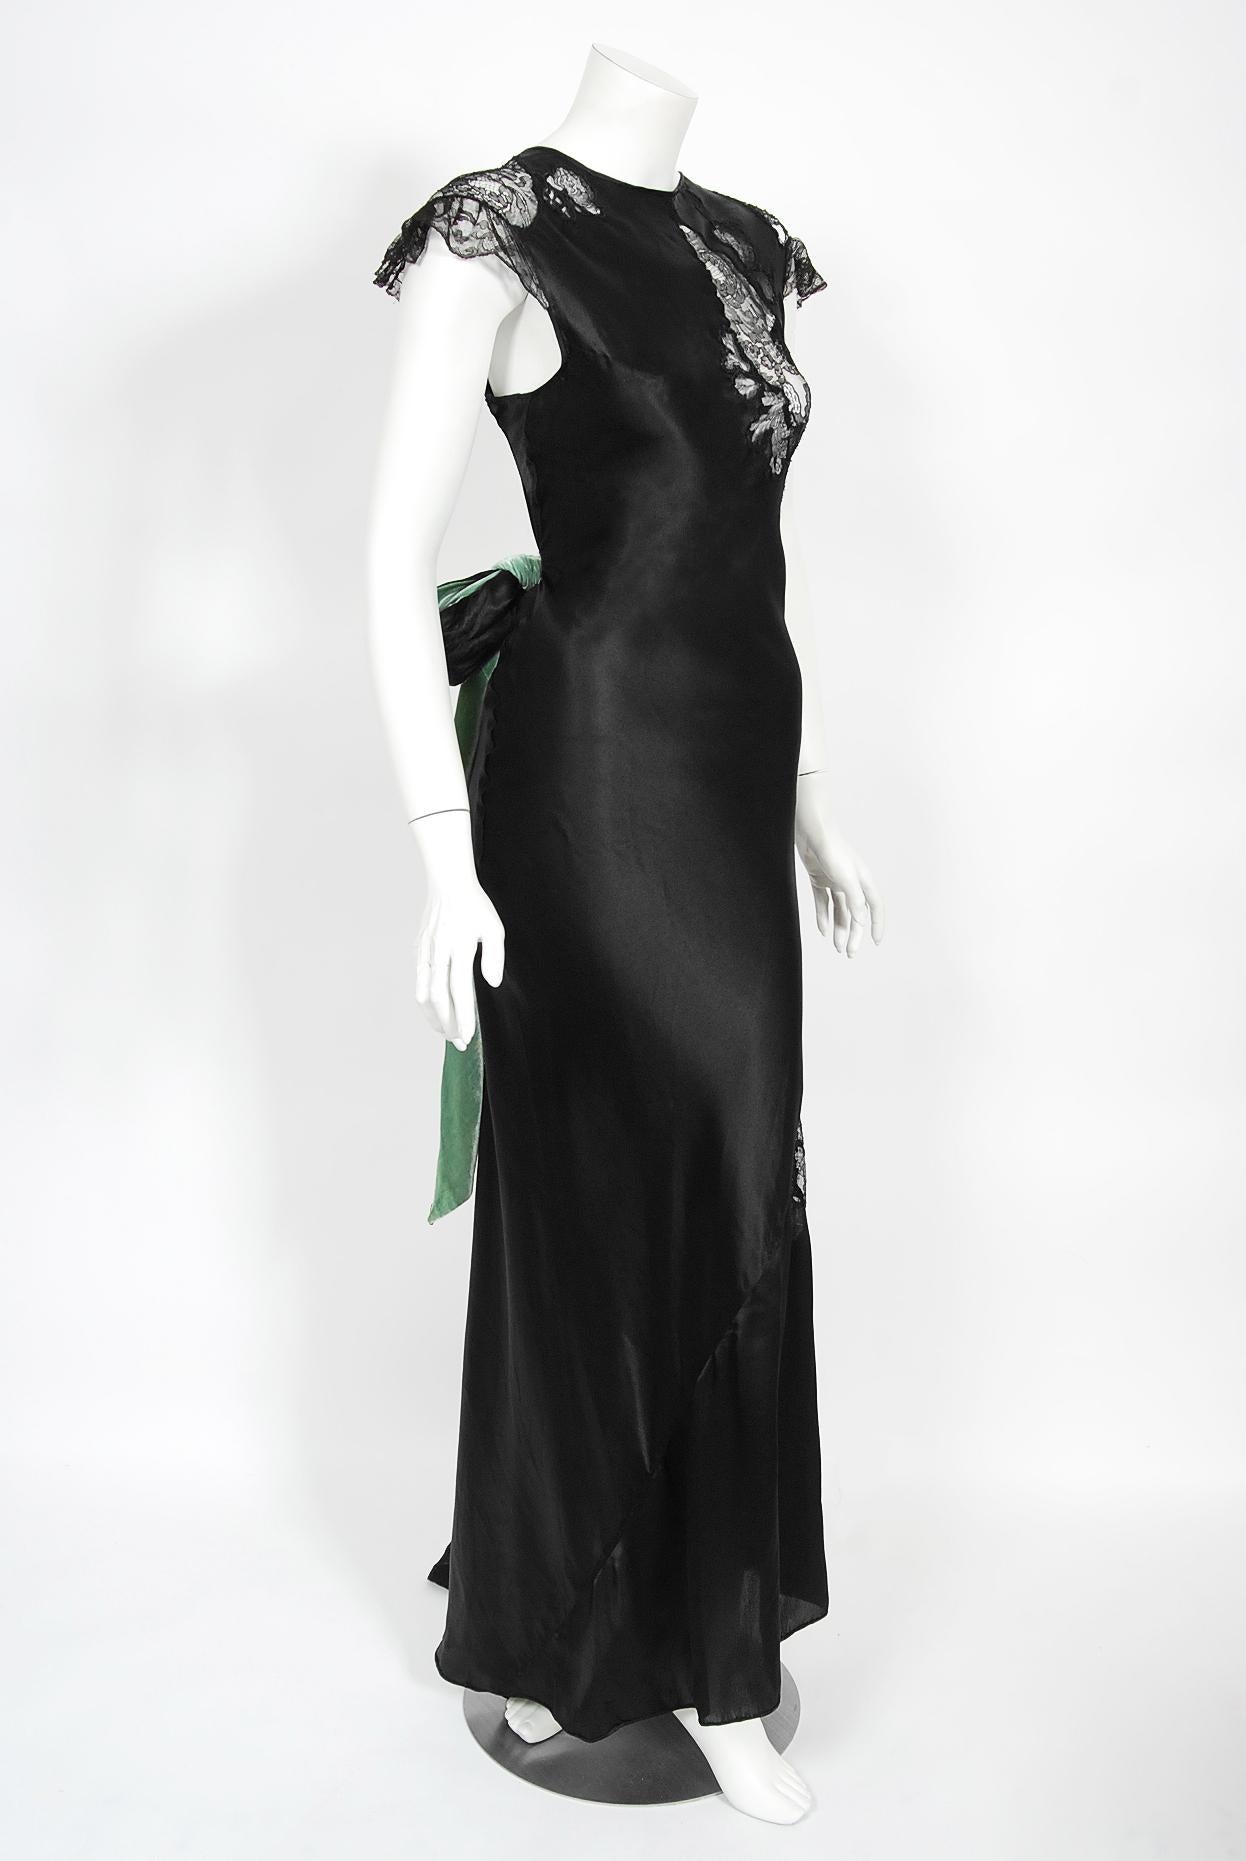 Vintage 1930's Black Silk & Sheer Lace Cut Outs Hourglass Bias-Cut Trained Gown  9